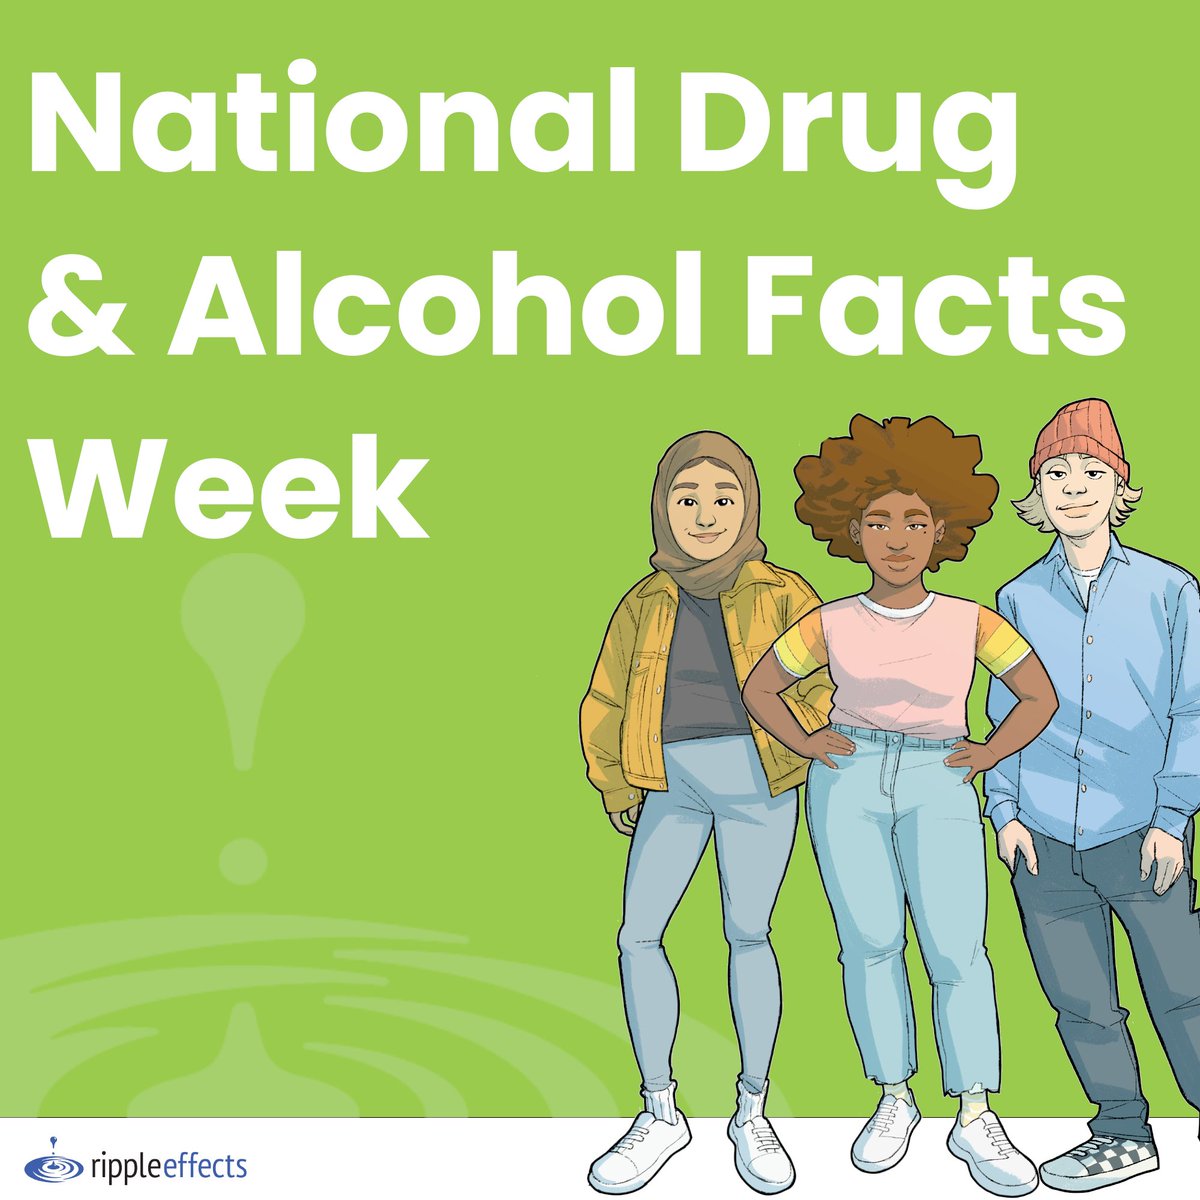 During National Drug & Alcohol Facts Week® & all year, teens can test their knowledge about drugs, alcohol, & drug use by taking the interactive National Drug & Alcohol IQ Challenge quiz. Ripple Effects has programs that can help kids cope with these issues. #NDAFW #RippleEffects